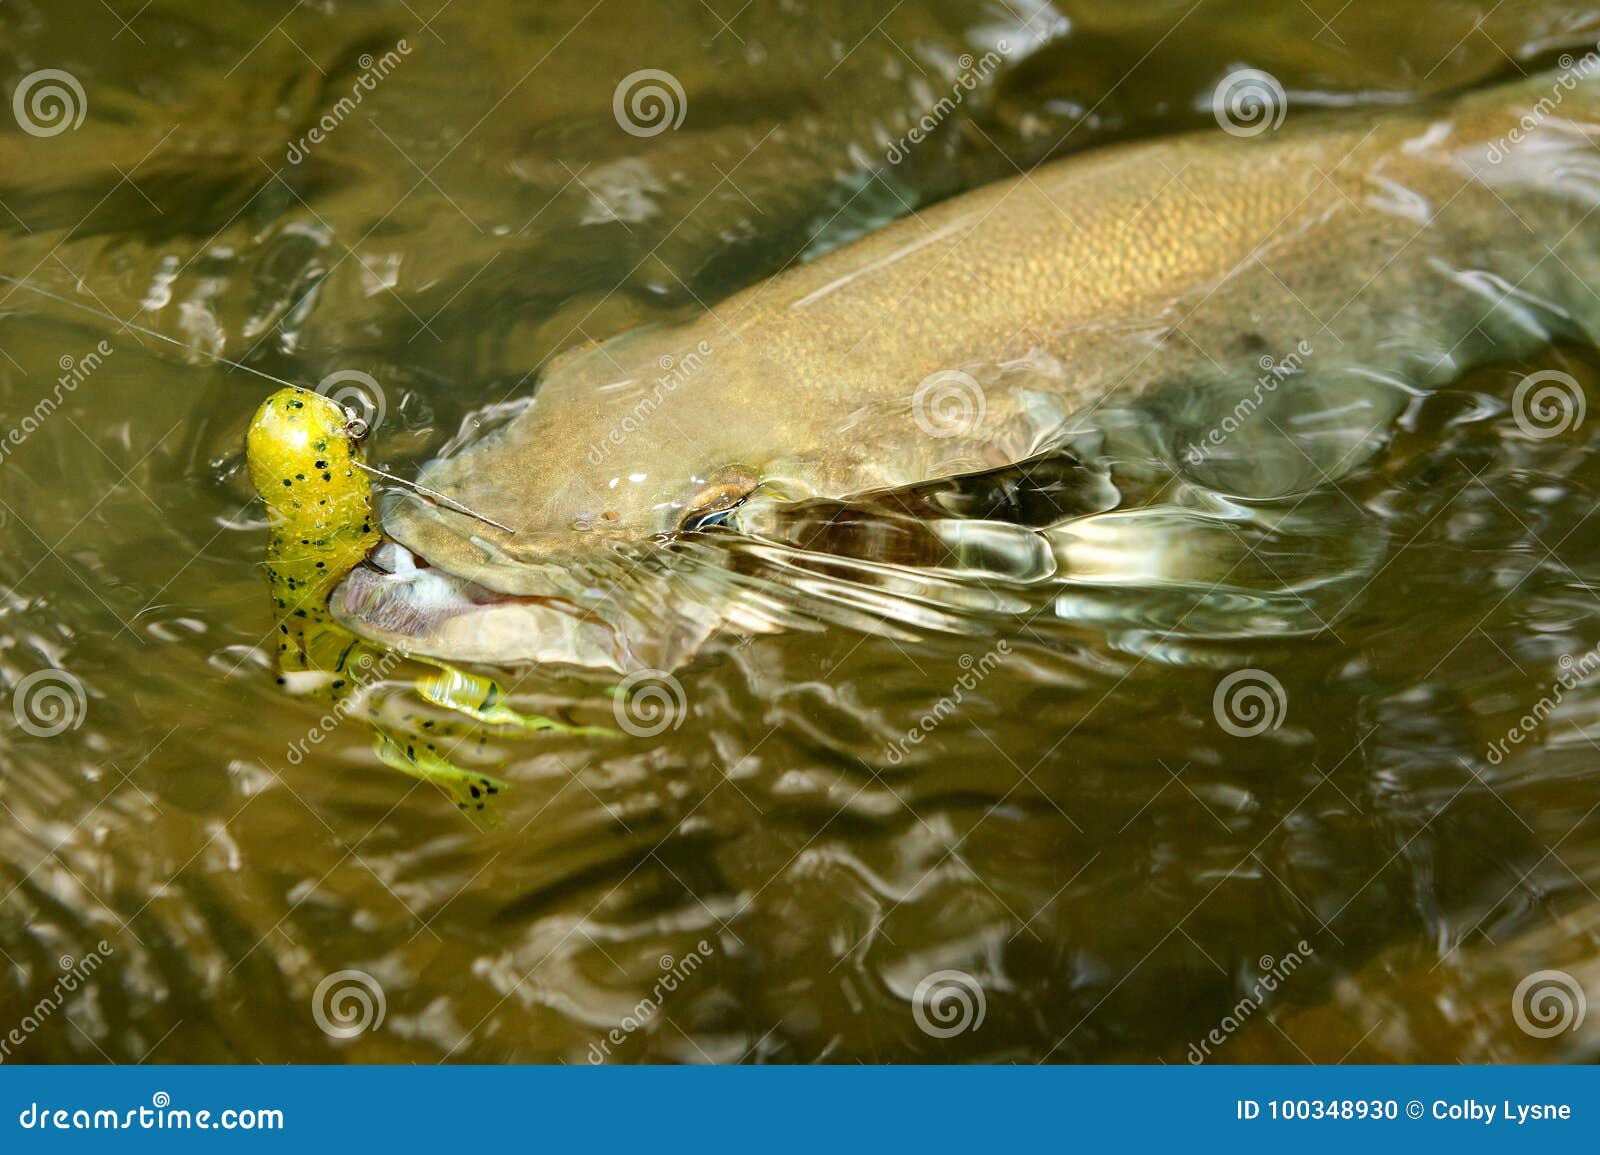 https://thumbs.dreamstime.com/z/hooked-smallmouth-bass-being-reeled-to-shallow-water-yellow-bobber-alongside-suspended-line-viewed-above-100348930.jpg